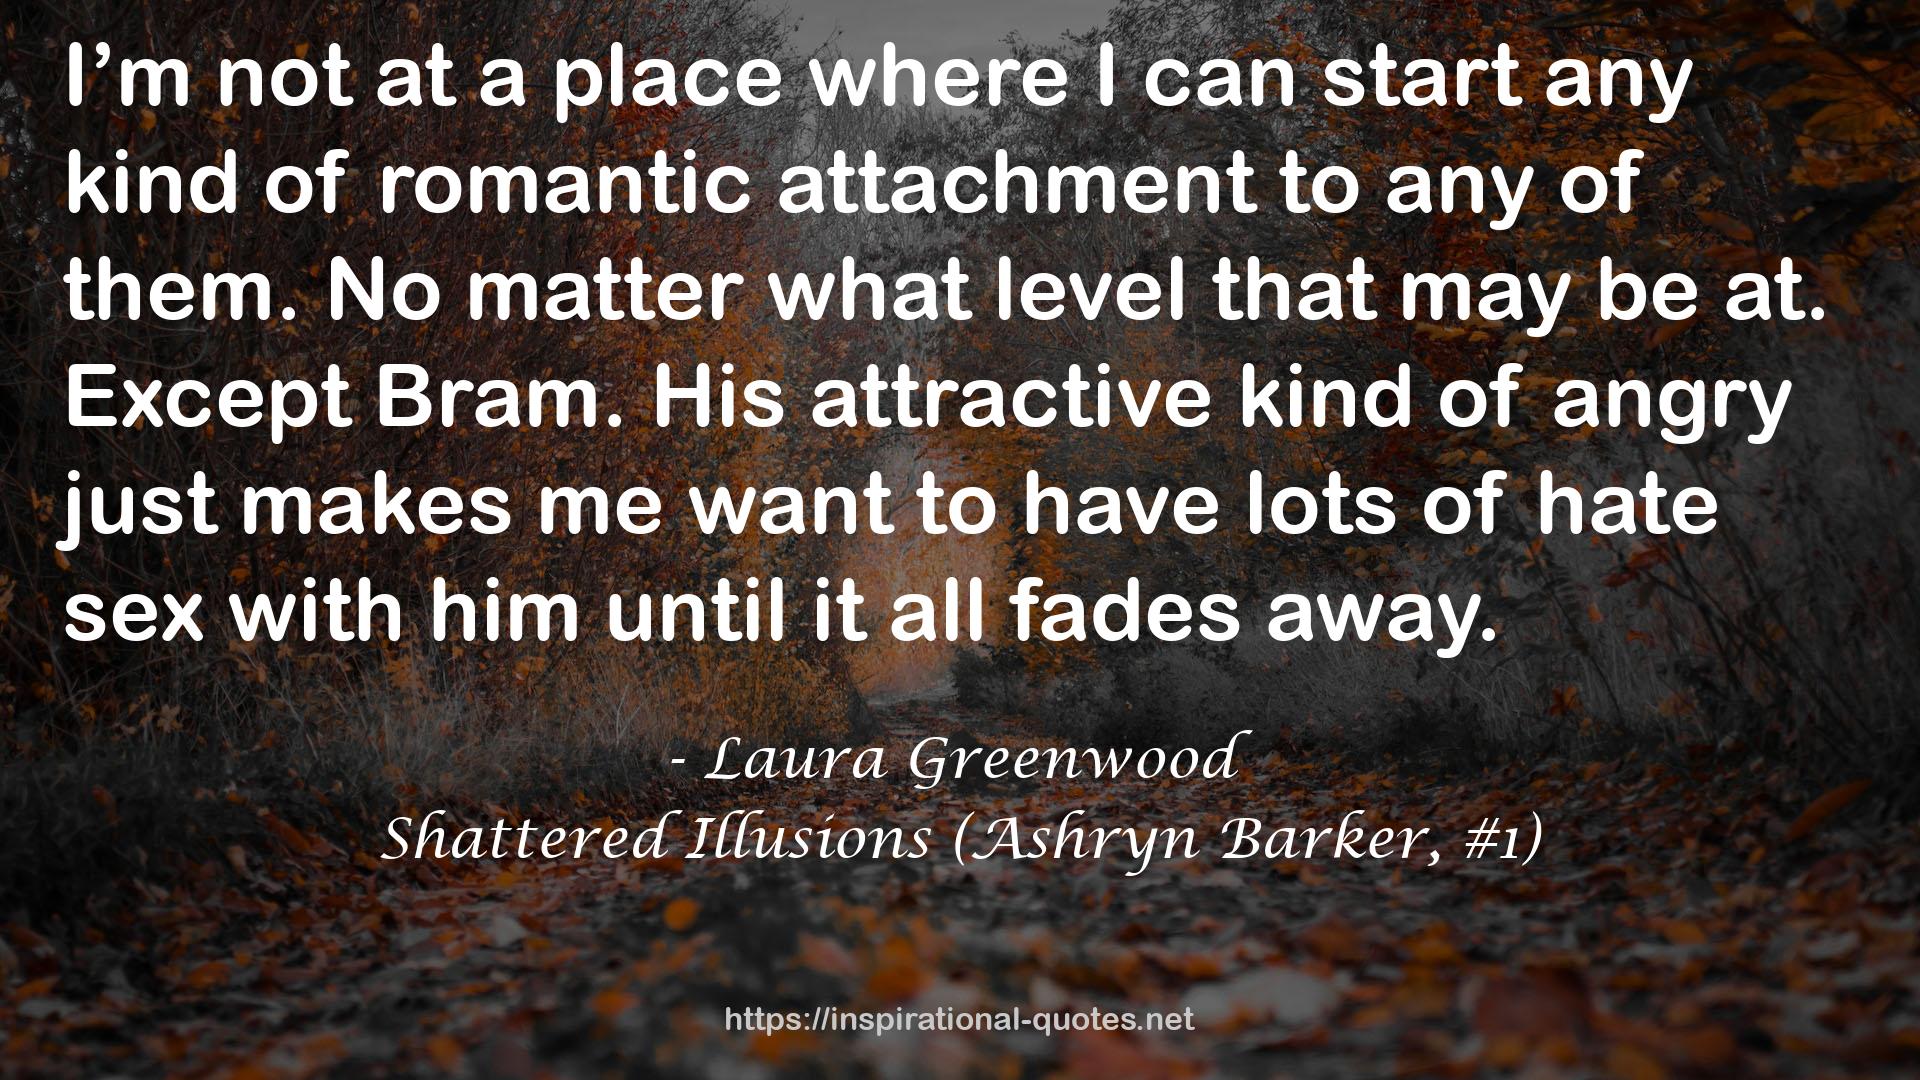 Shattered Illusions (Ashryn Barker, #1) QUOTES